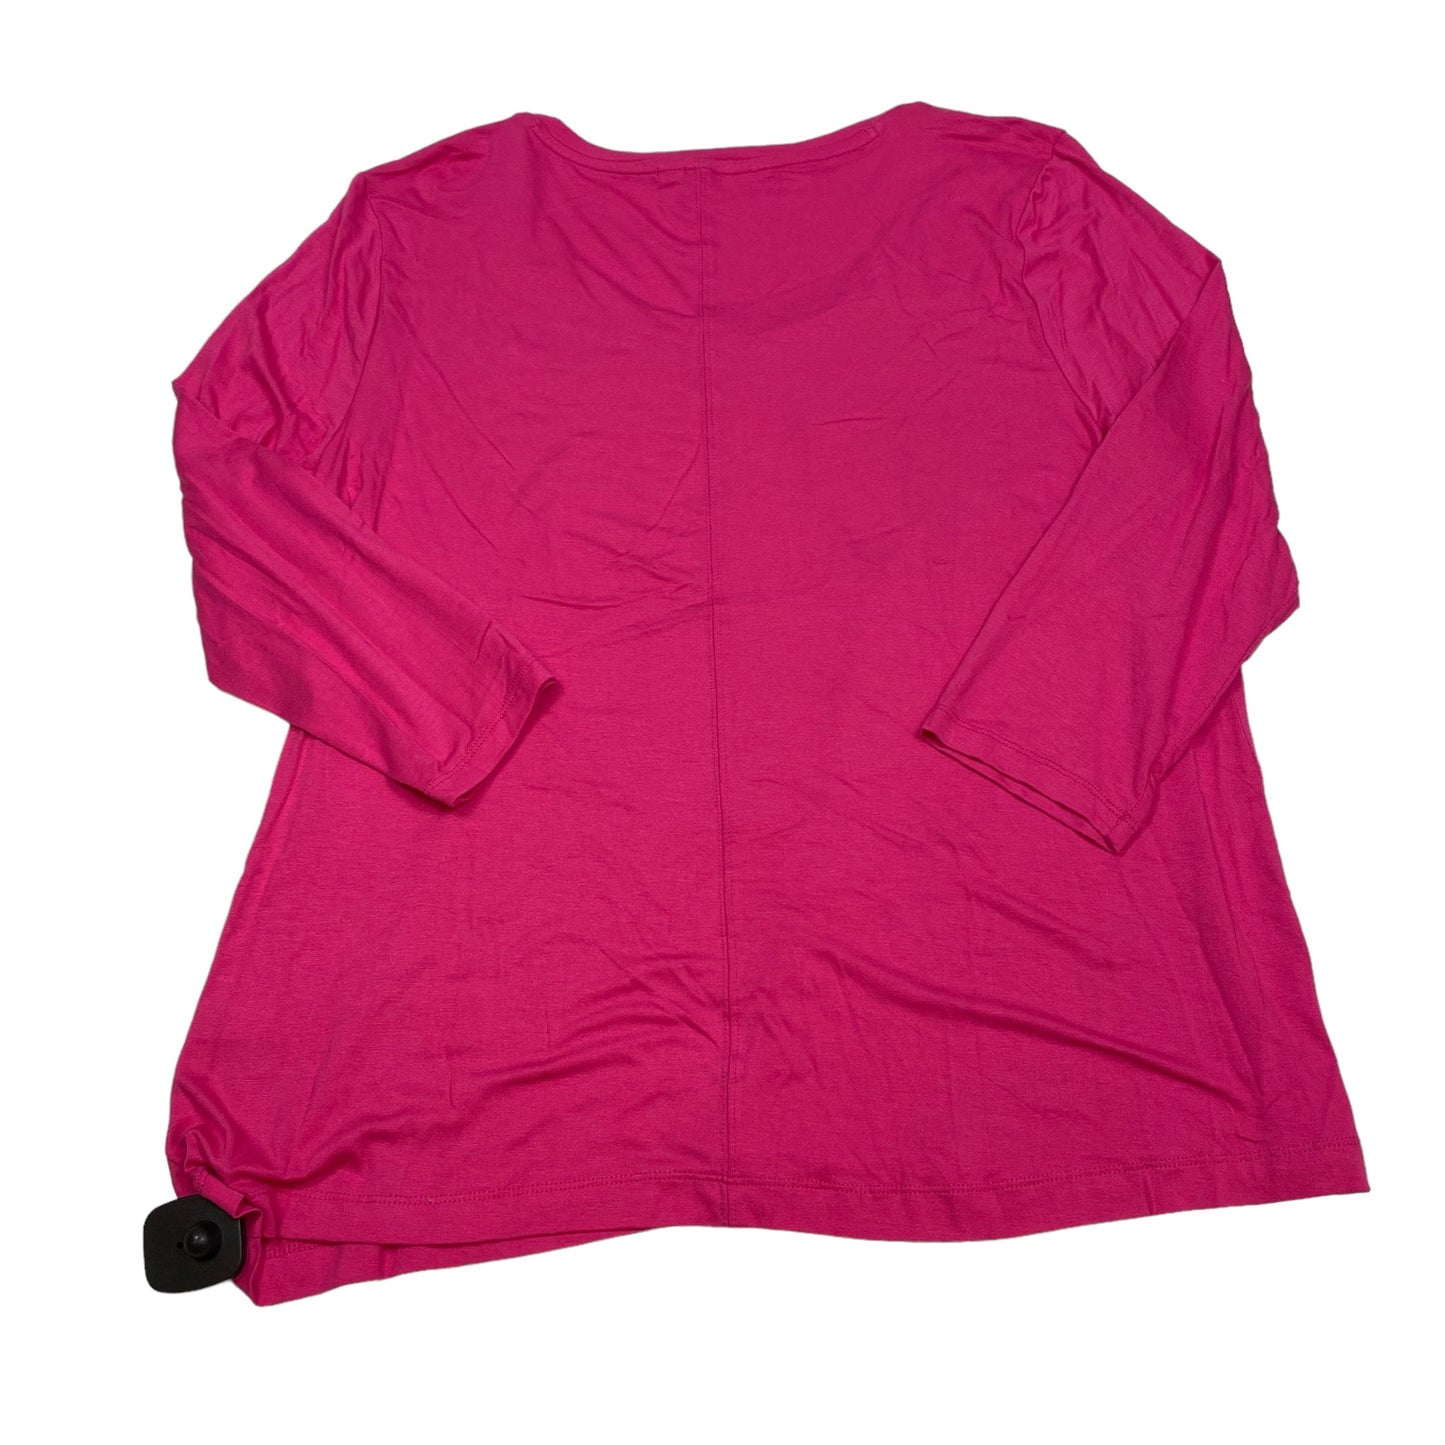 Pink Top Long Sleeve Basic Cato, Size Xl